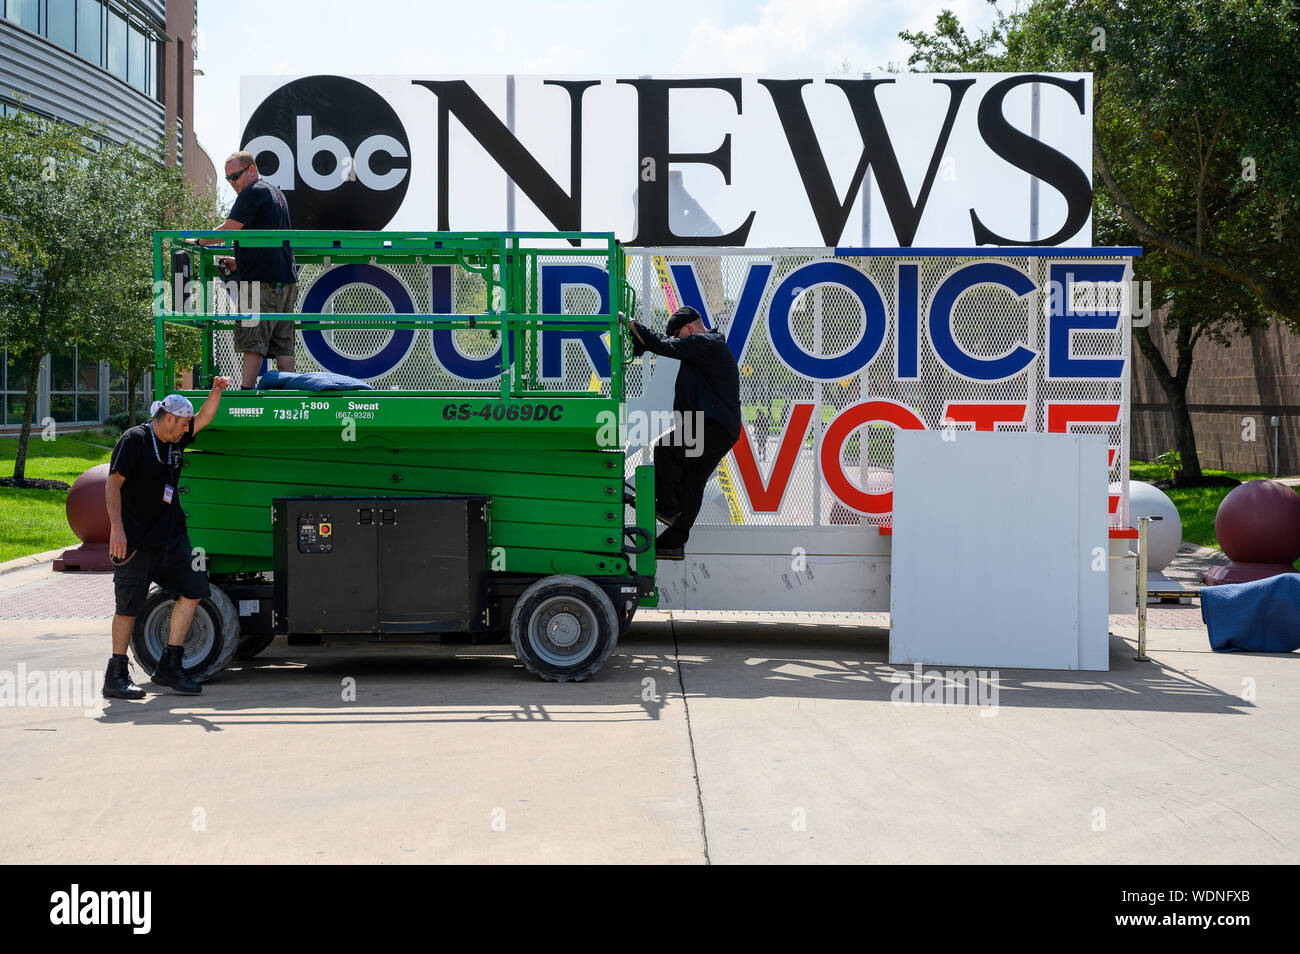 Houston, Texas - August 29, 2019: Preparations Underway for the ABC News Democratic Primary Debate at the Texas Southern University in Houston. Stock Photo